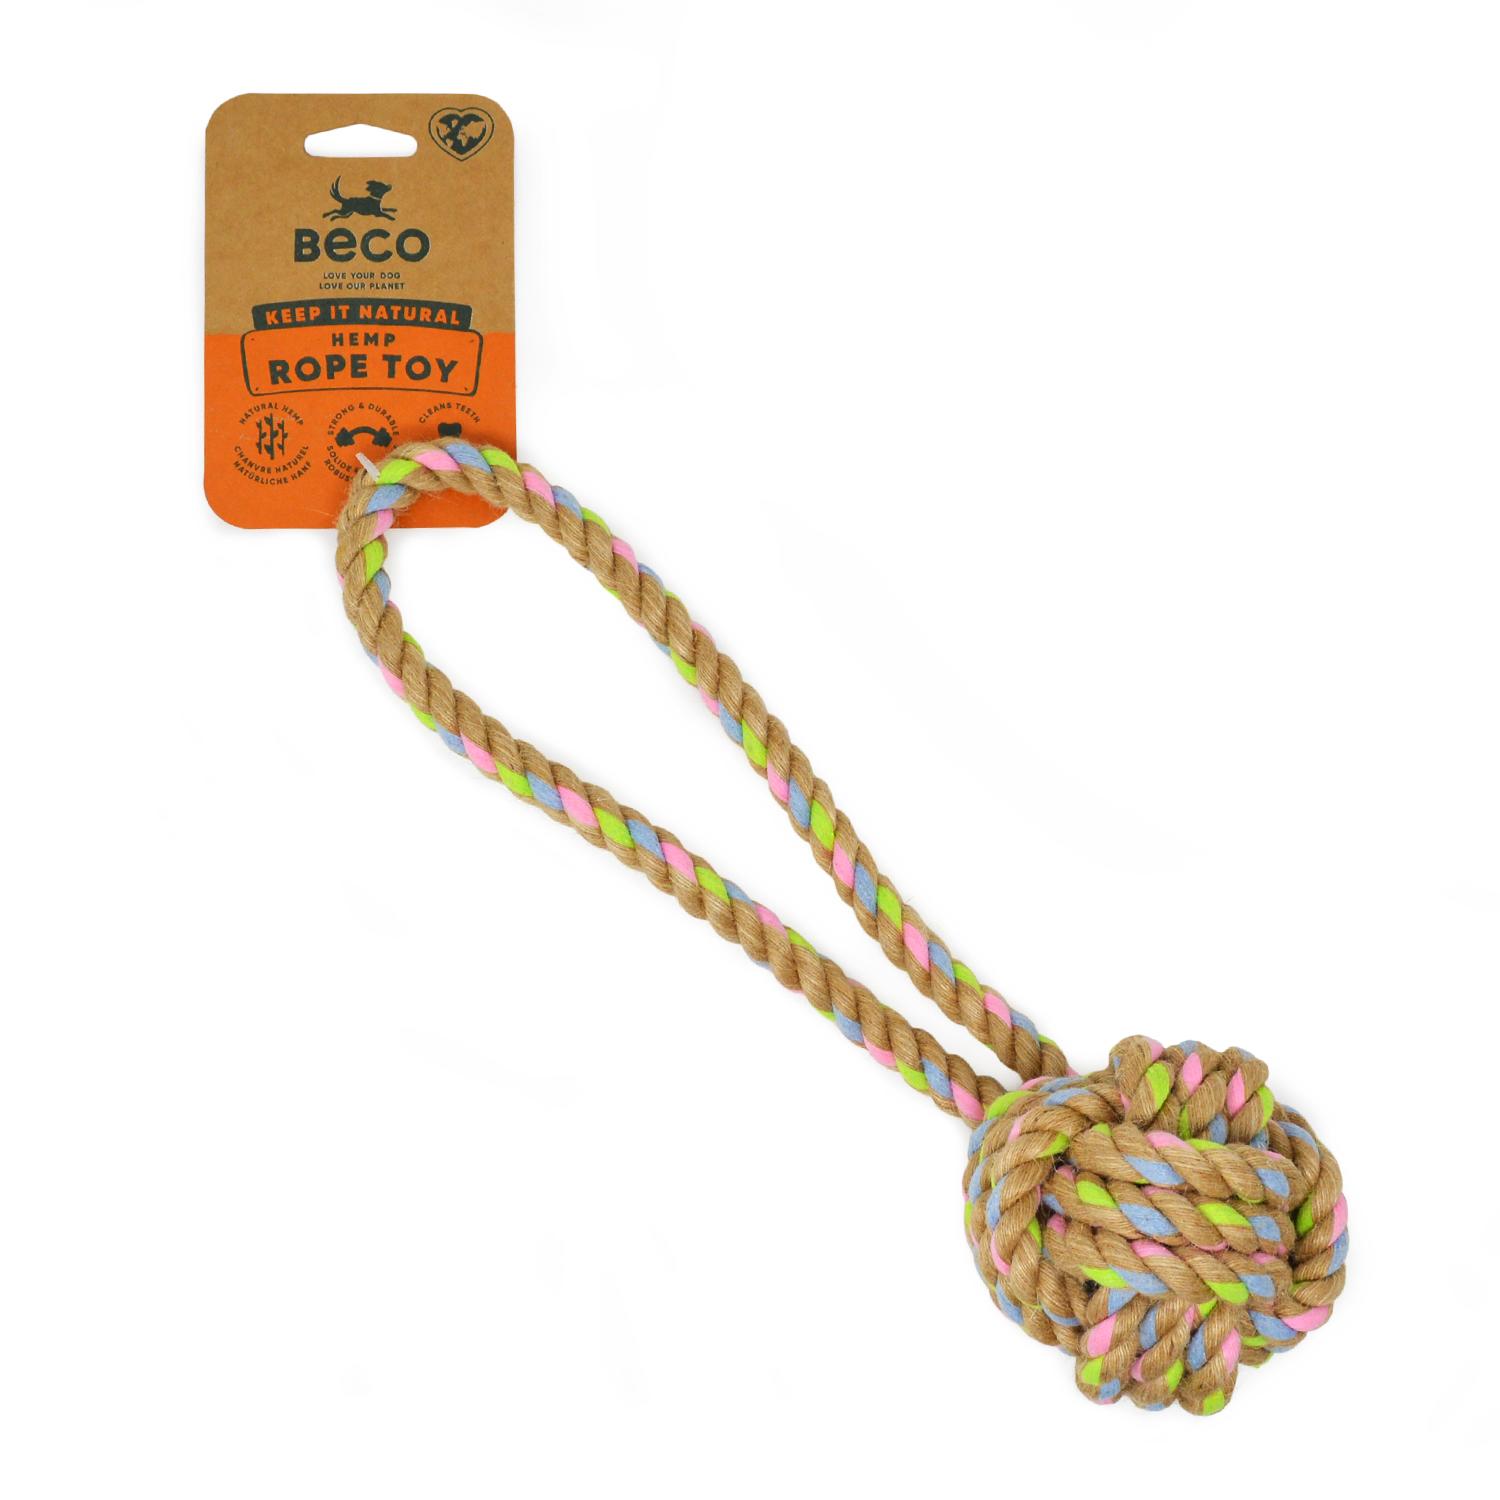 Beco Natural Hemp Rope Ball with handle for dogs